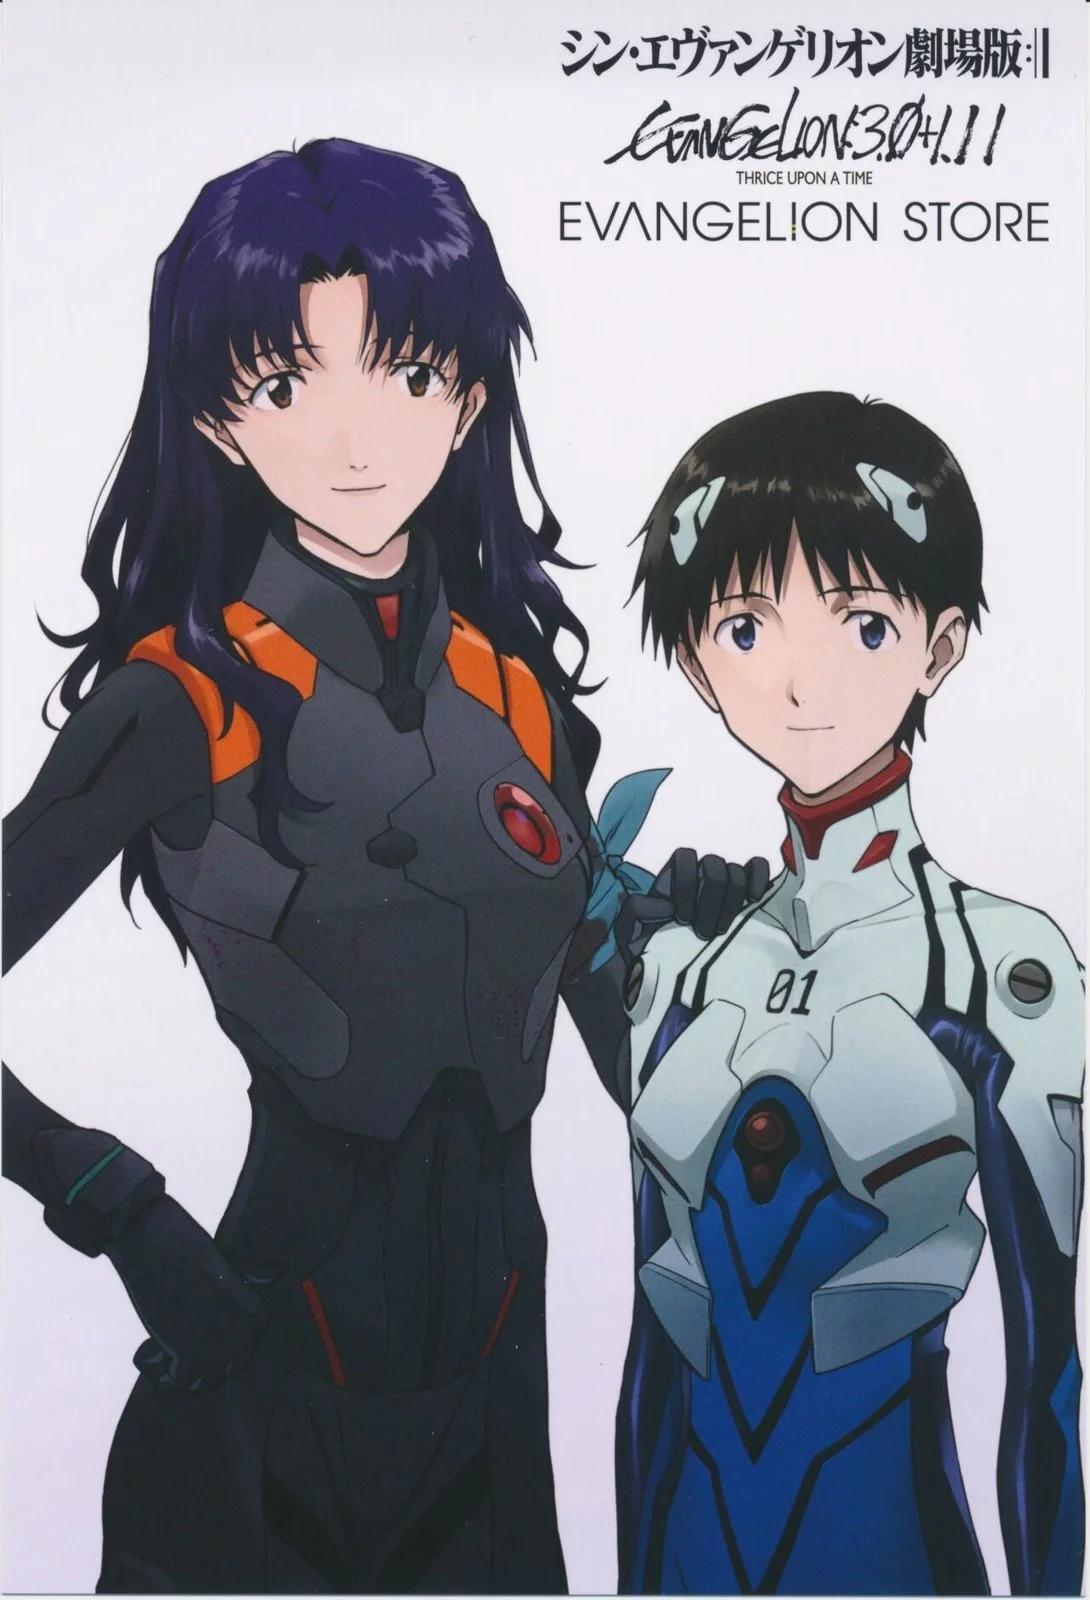 Evangelion 3.0+1.11 Thrice Upon a Time EVANGELION STORE Limited Set - Postcard - 1